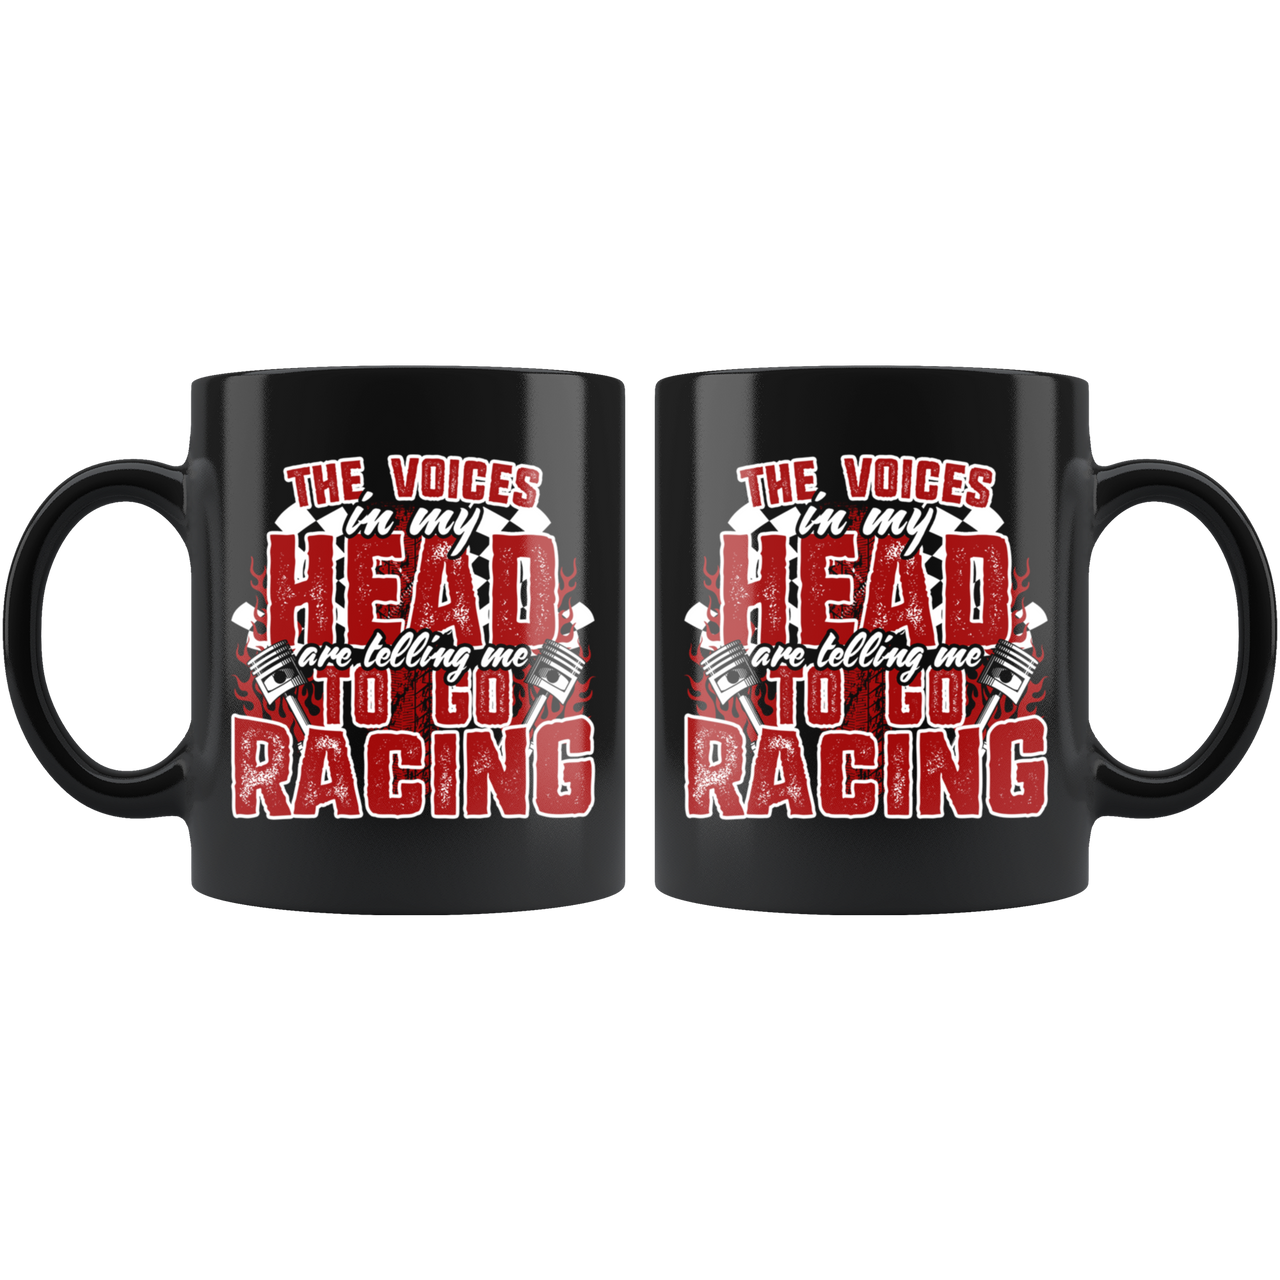 The Voices In My Head Are Telling Me To go Racing Mug!